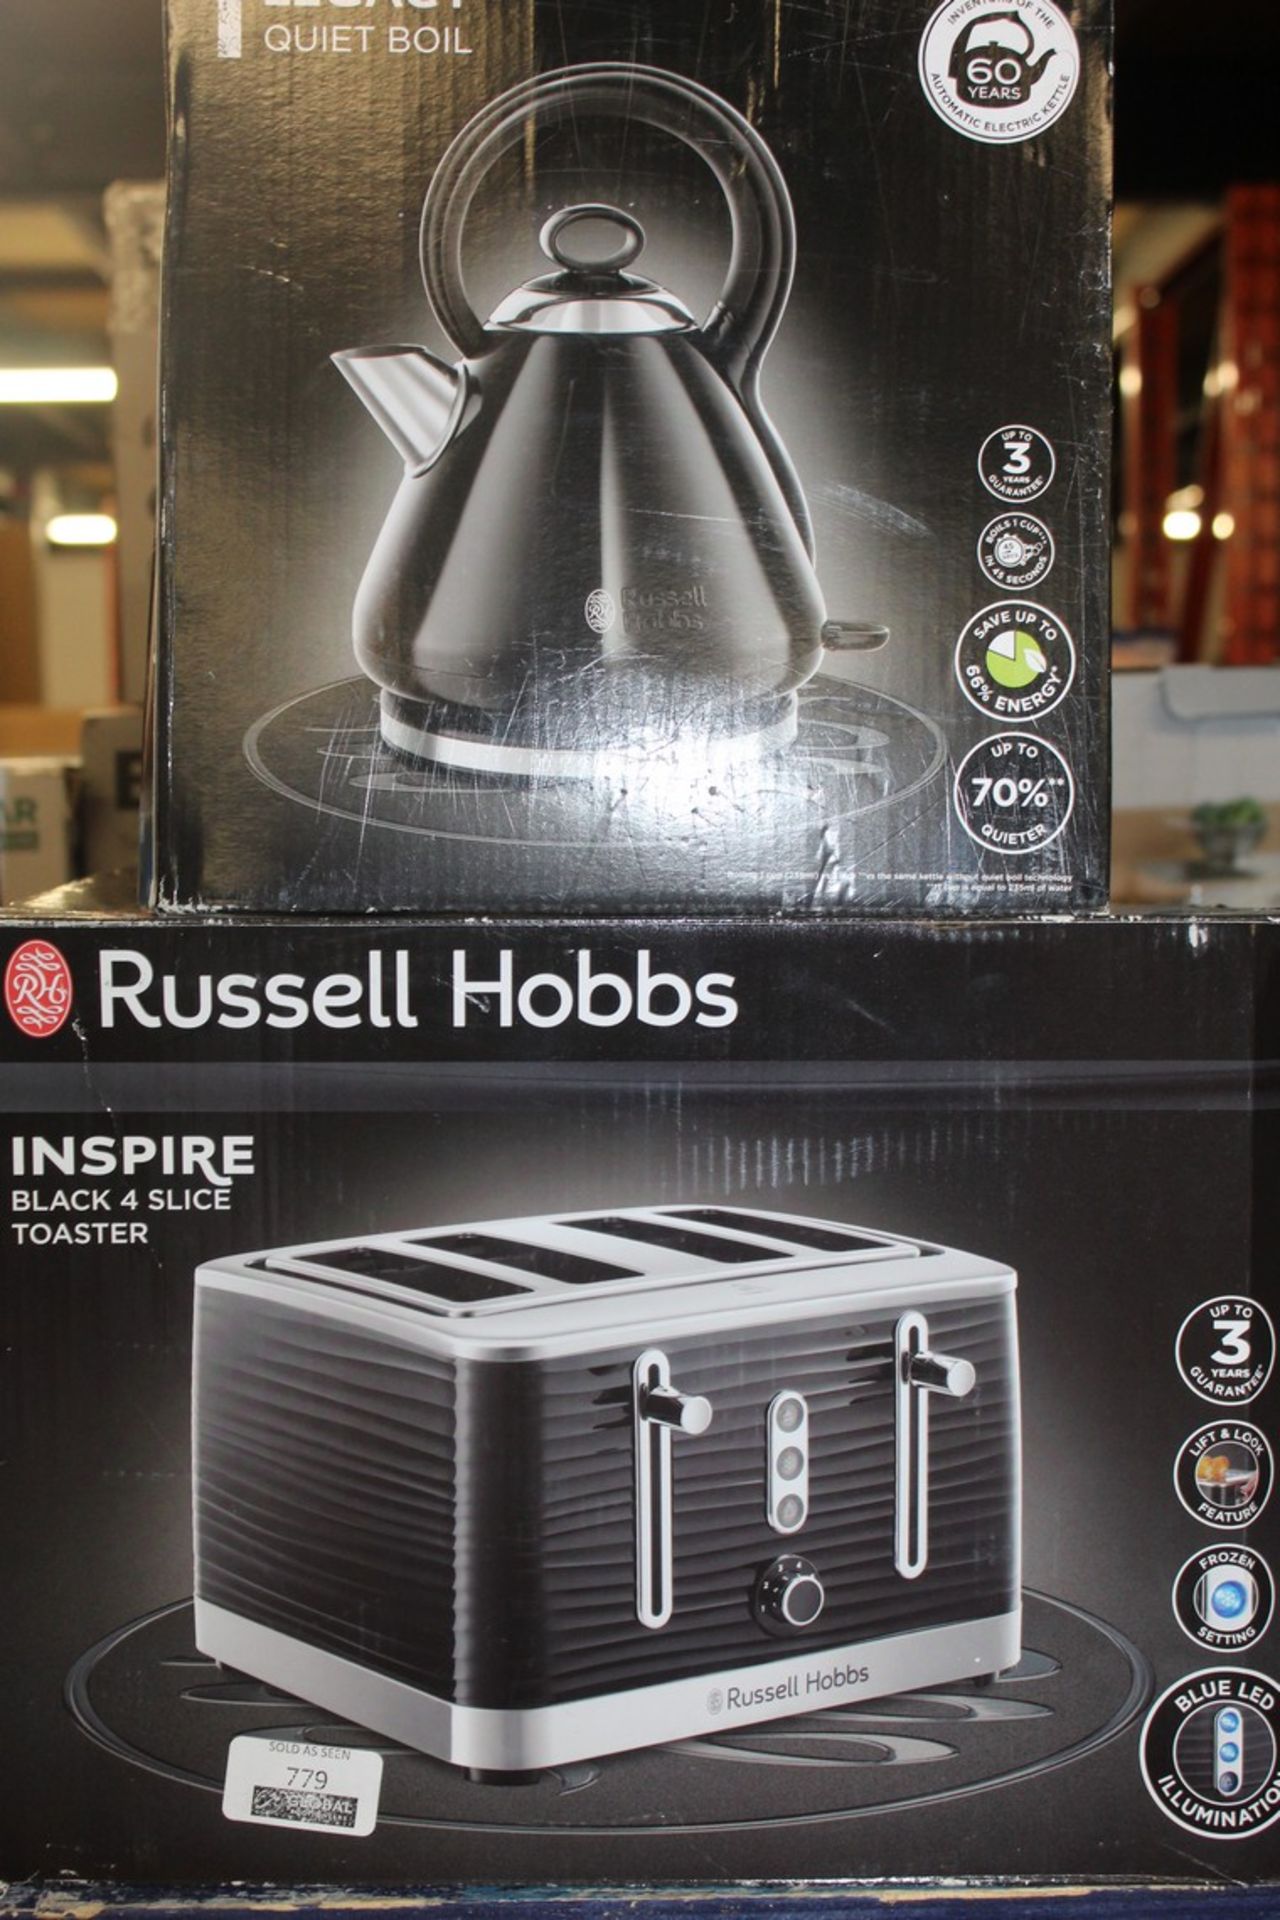 Boxed Assorted Kitchen Items To Include A Russell Hobbs Quiet Boil Kettle And A Russell Hobbs